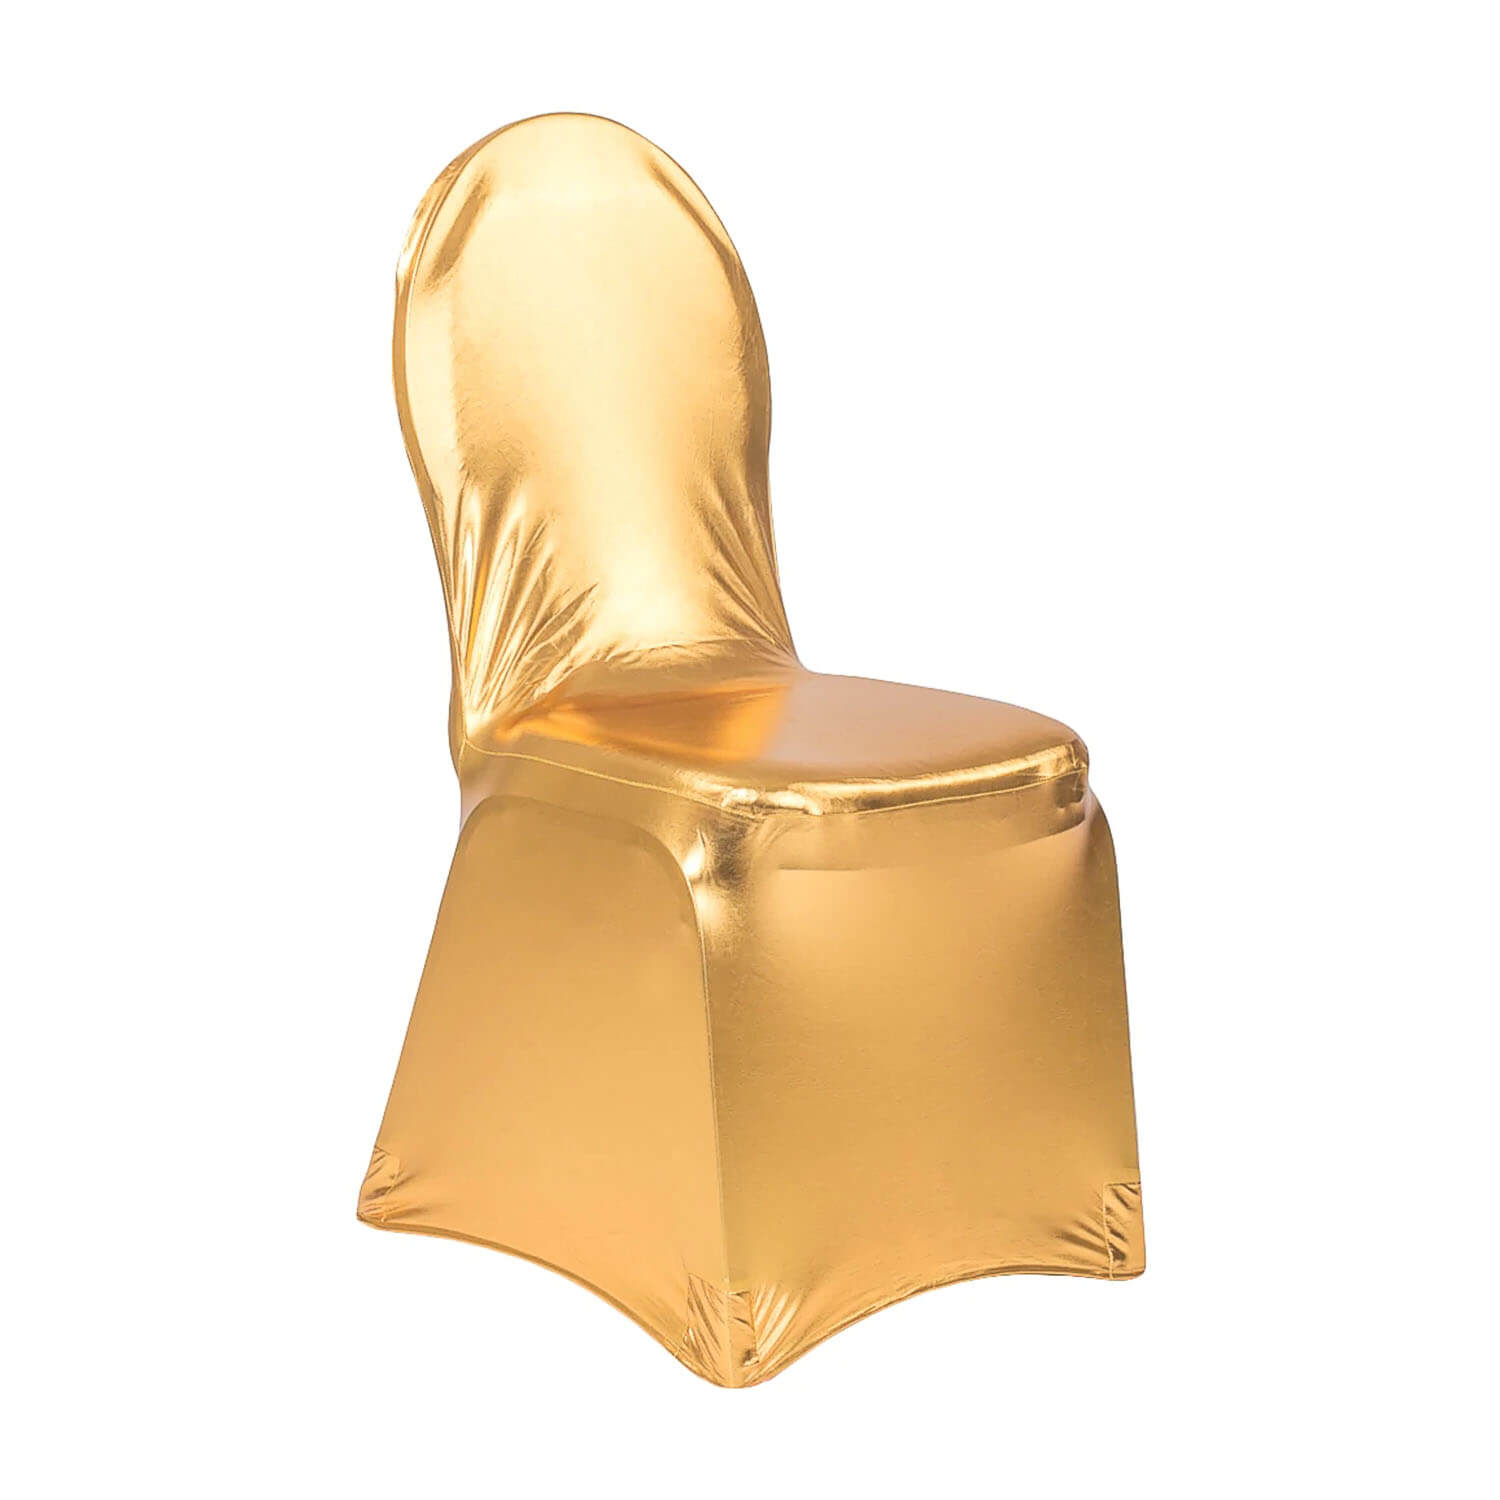 Metallic Gold Spandex Chair Covers